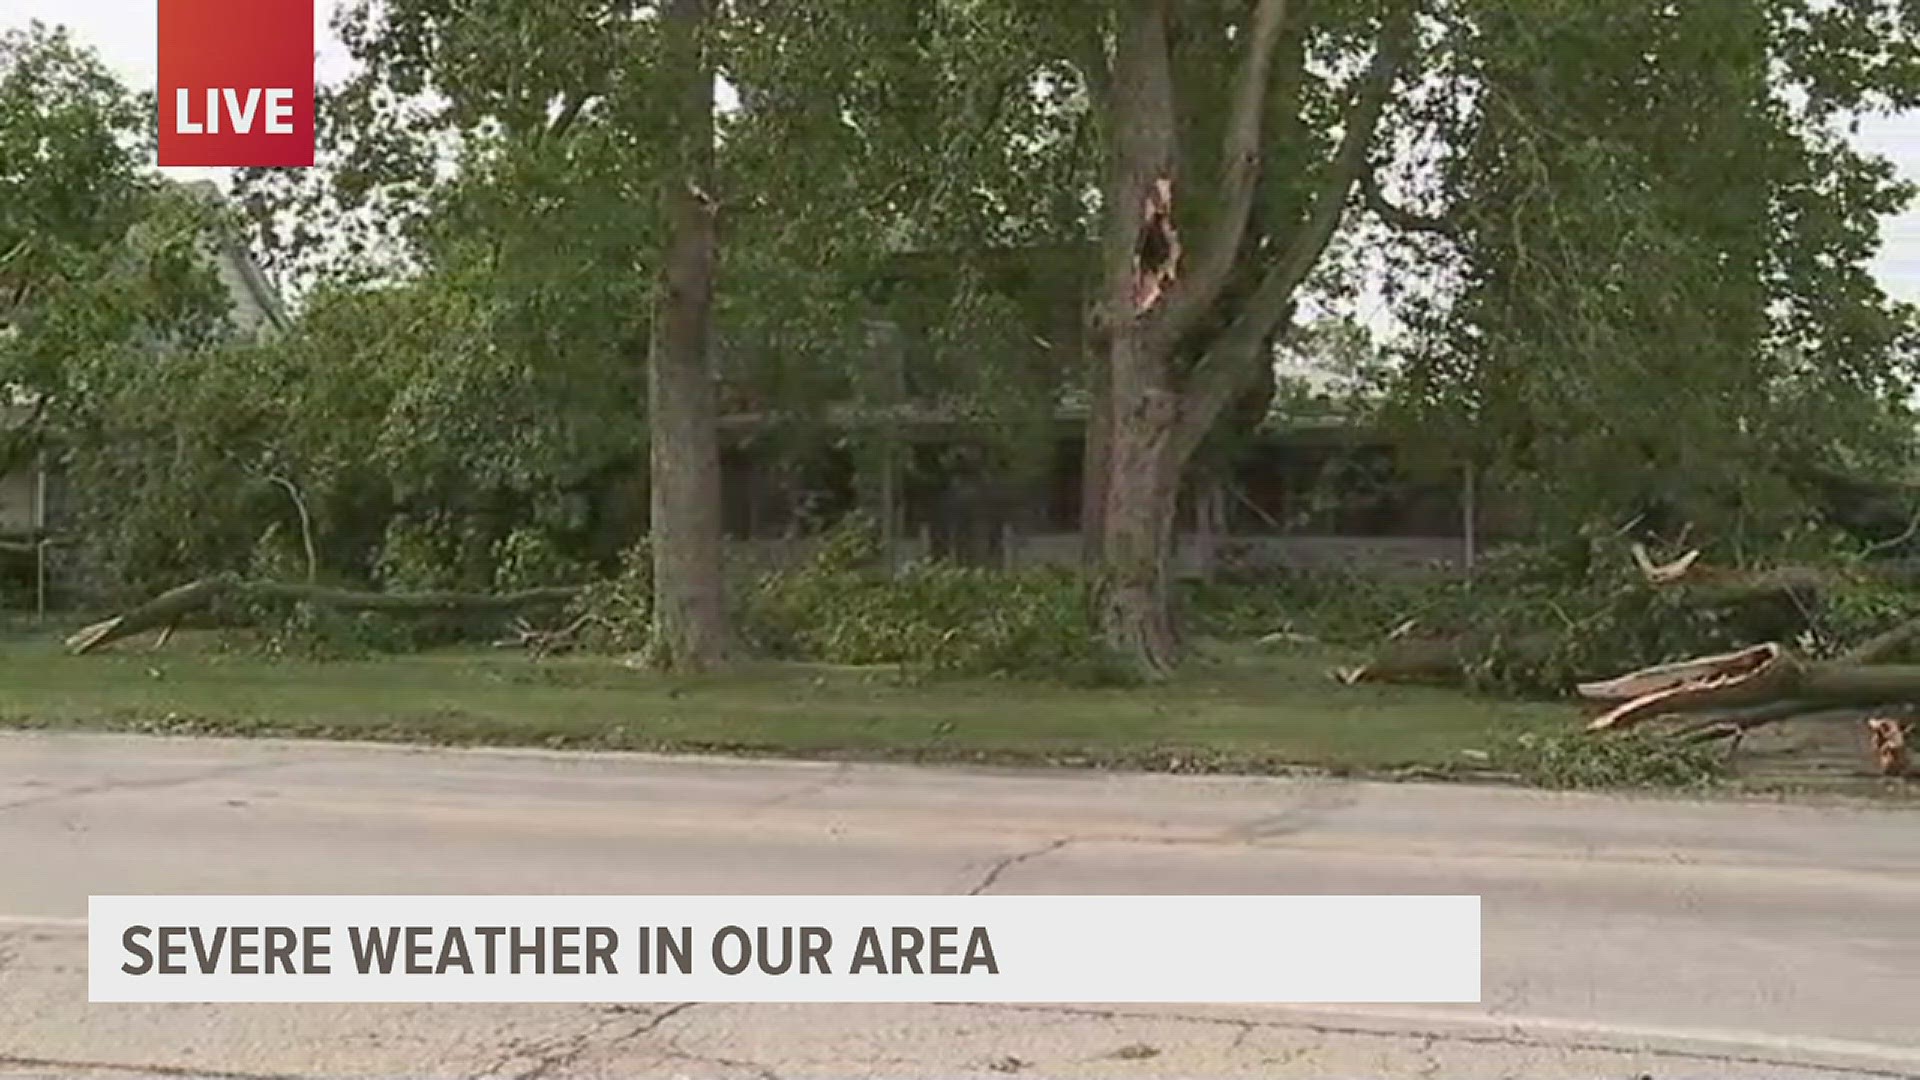 A strong system, now classified as a derecho, swept through the Quad Cities area earlier today.